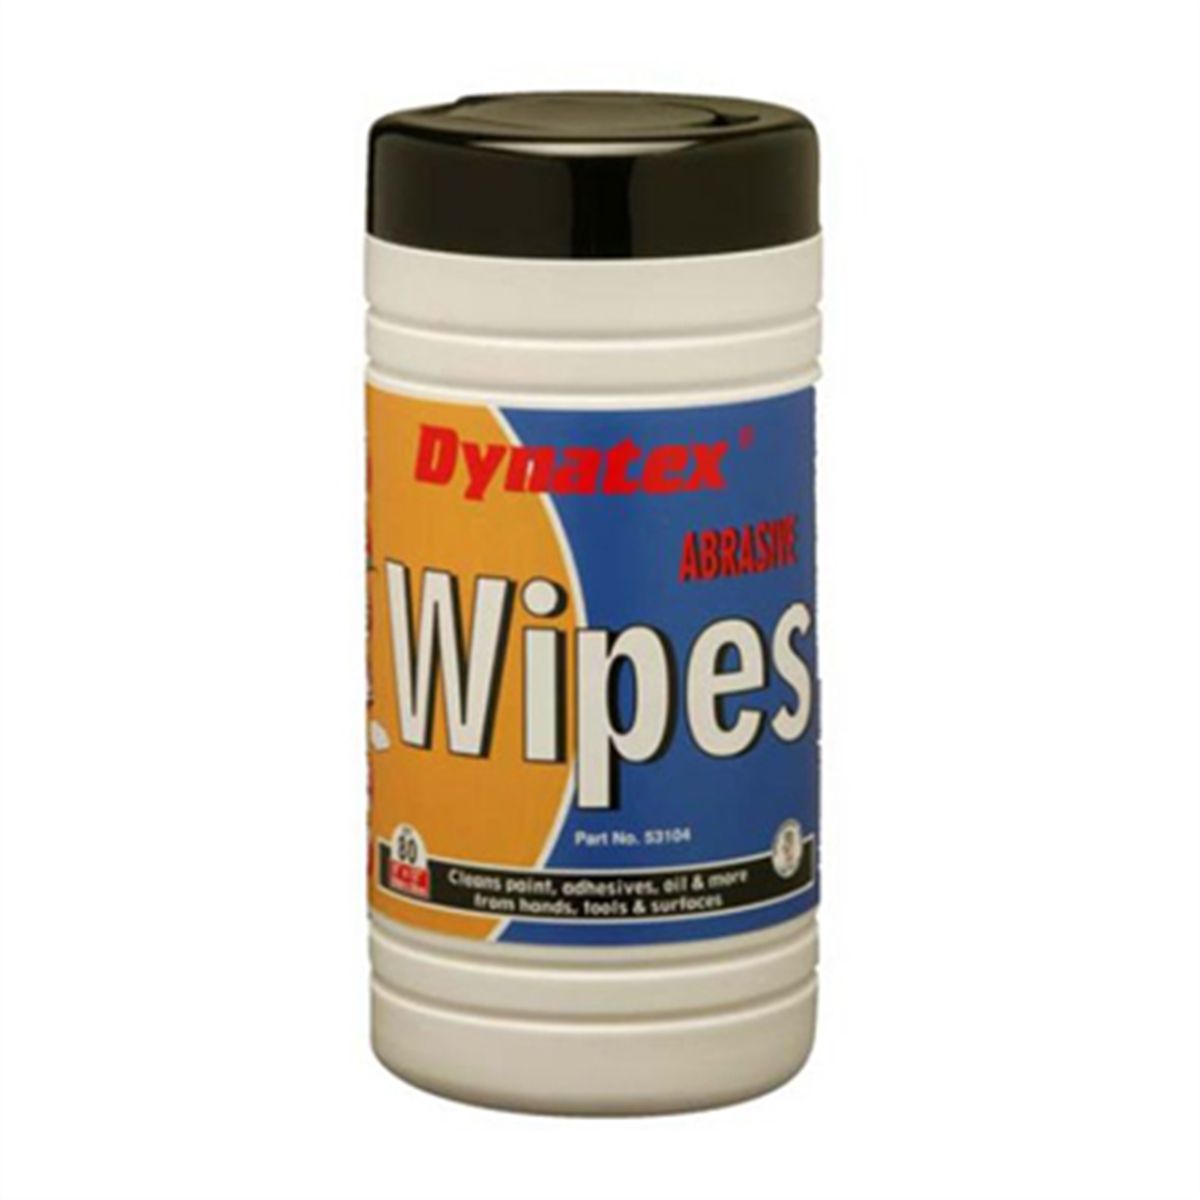 Dual Sided Hand Wipes